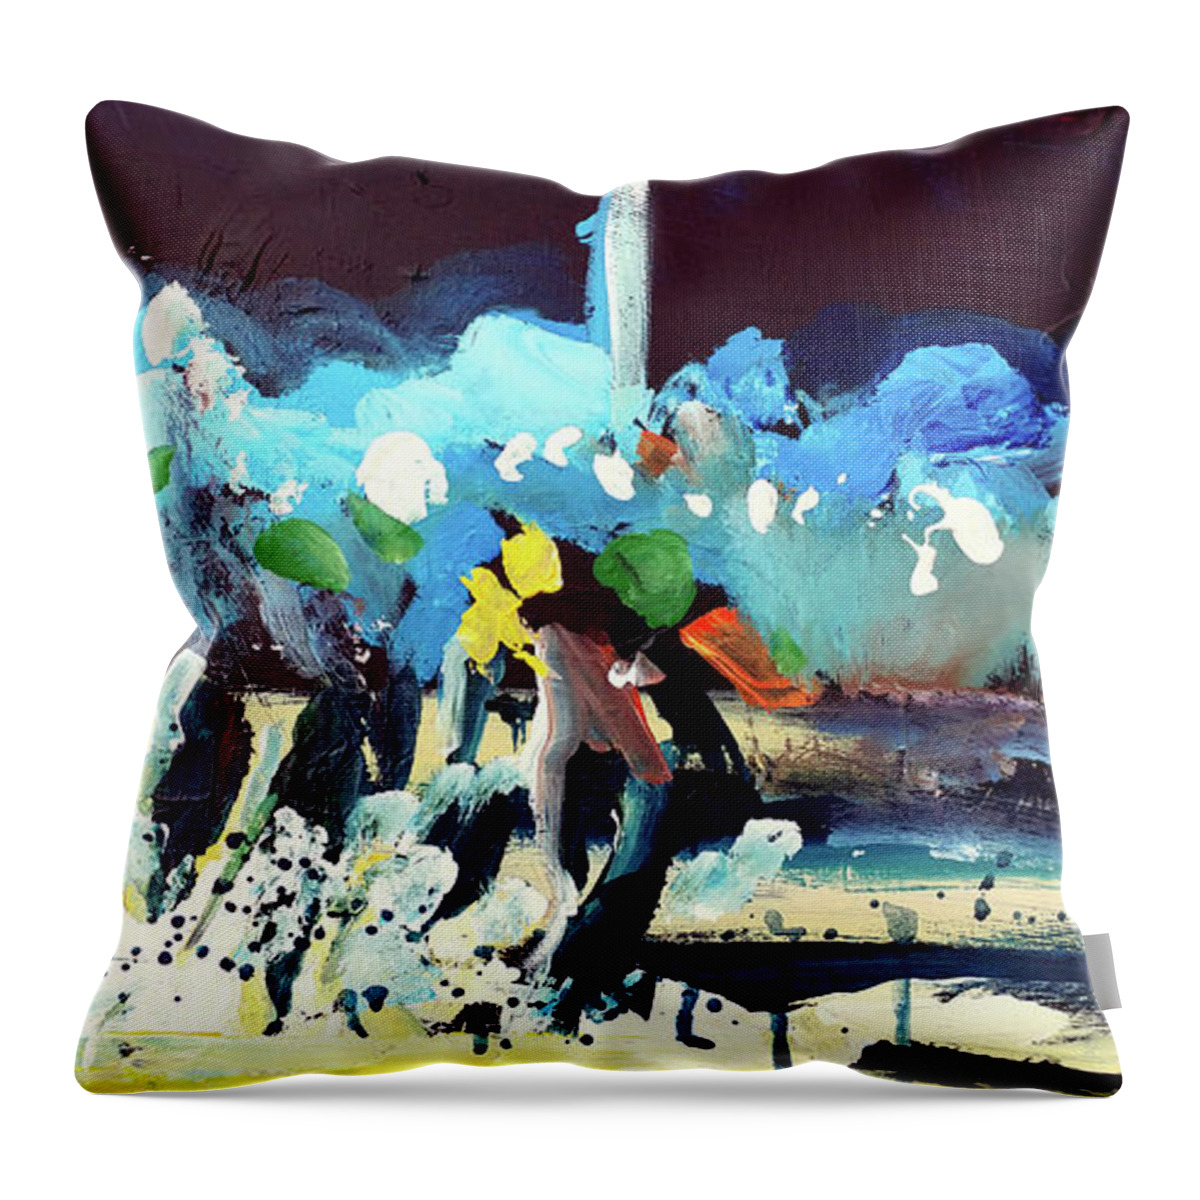 Kentucky Horse Racing Throw Pillow featuring the painting Night Race by John Gholson